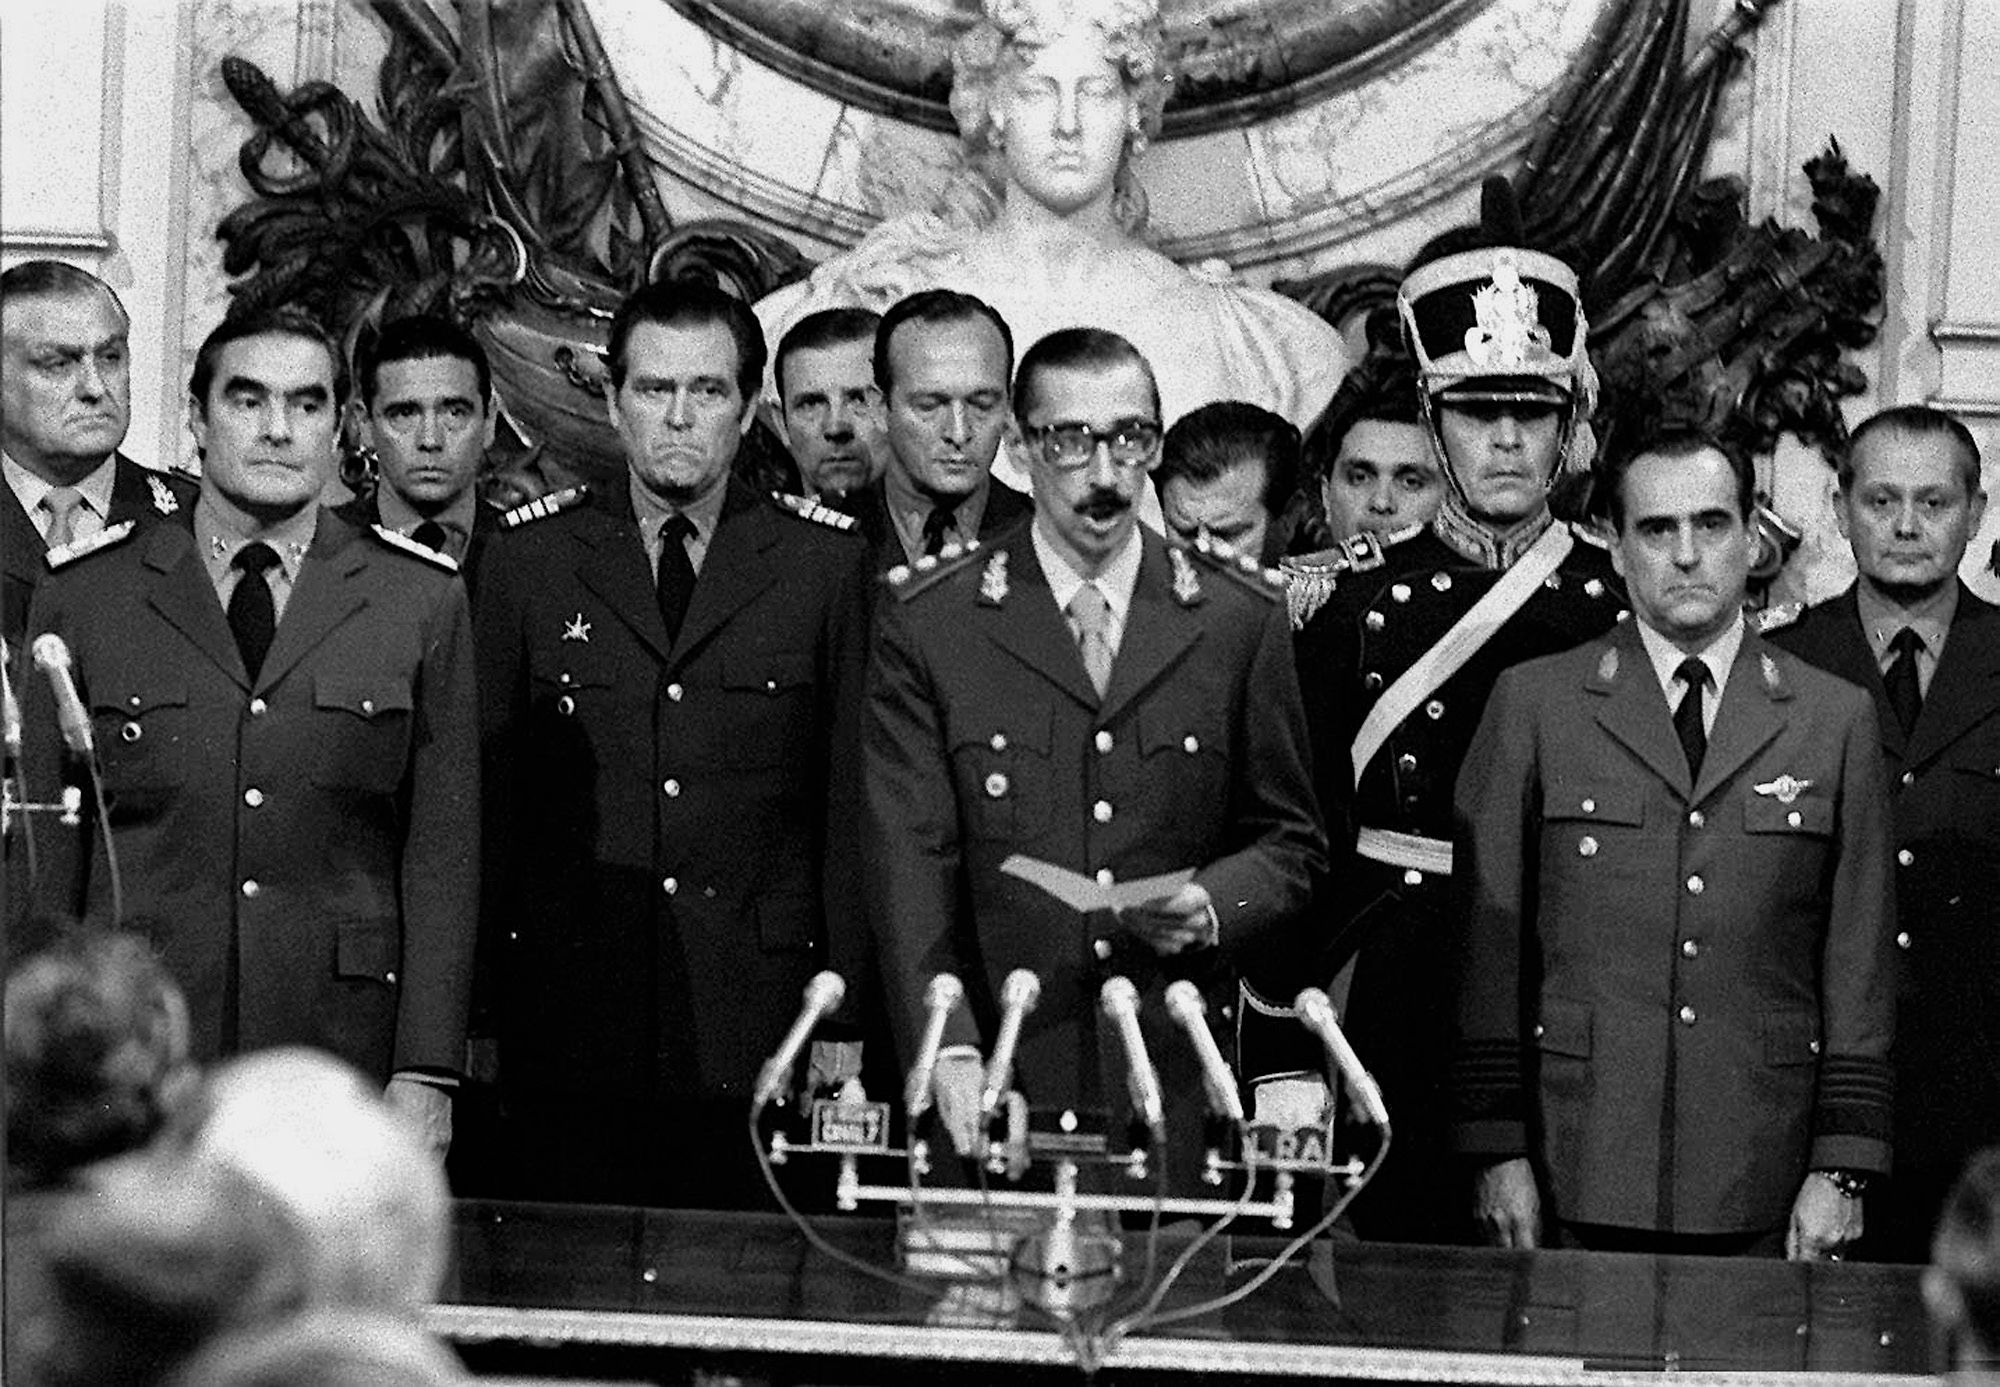 Rafael Videla’s oath before assuming his role as the dictator of Argentina